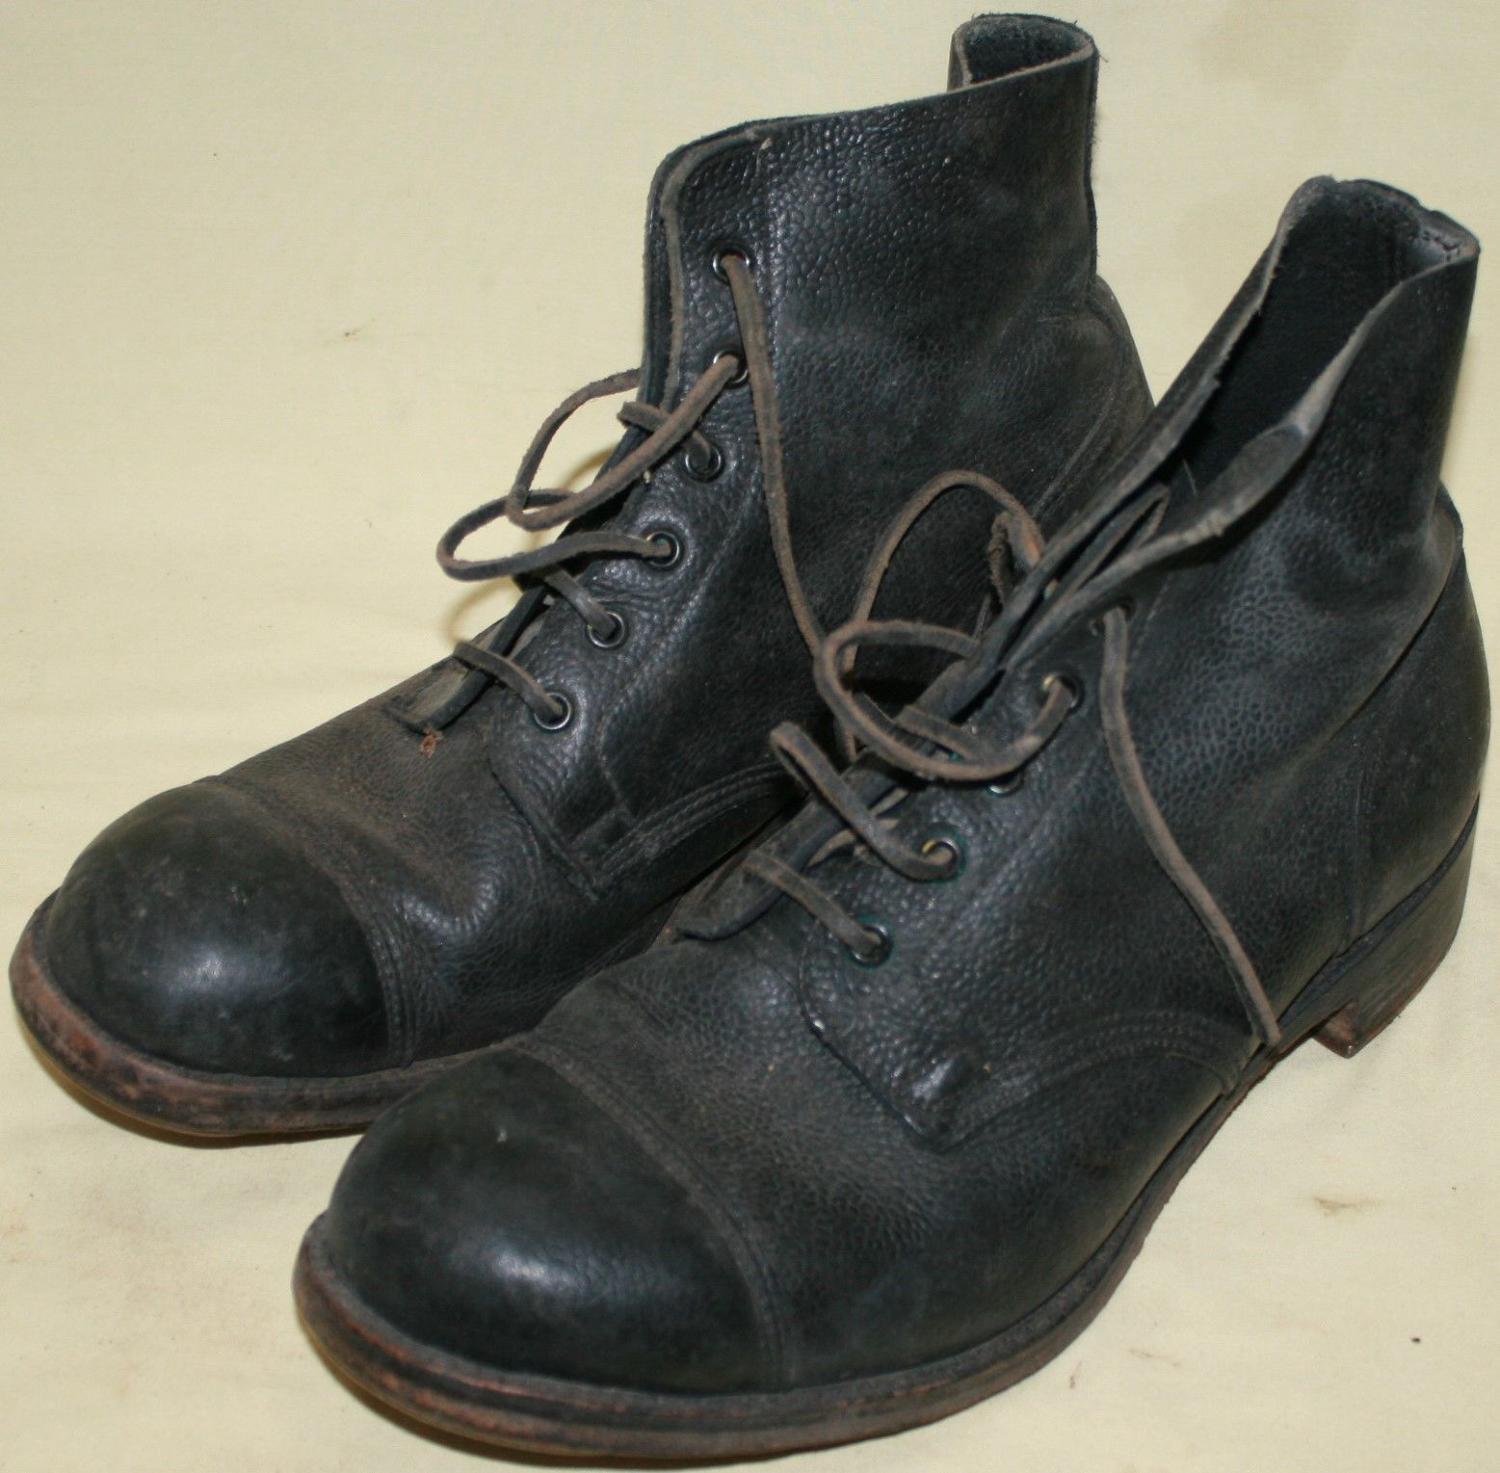 A GOOD PAIR OF SIZE 10 M AMMO BOOTS 1954 DATED